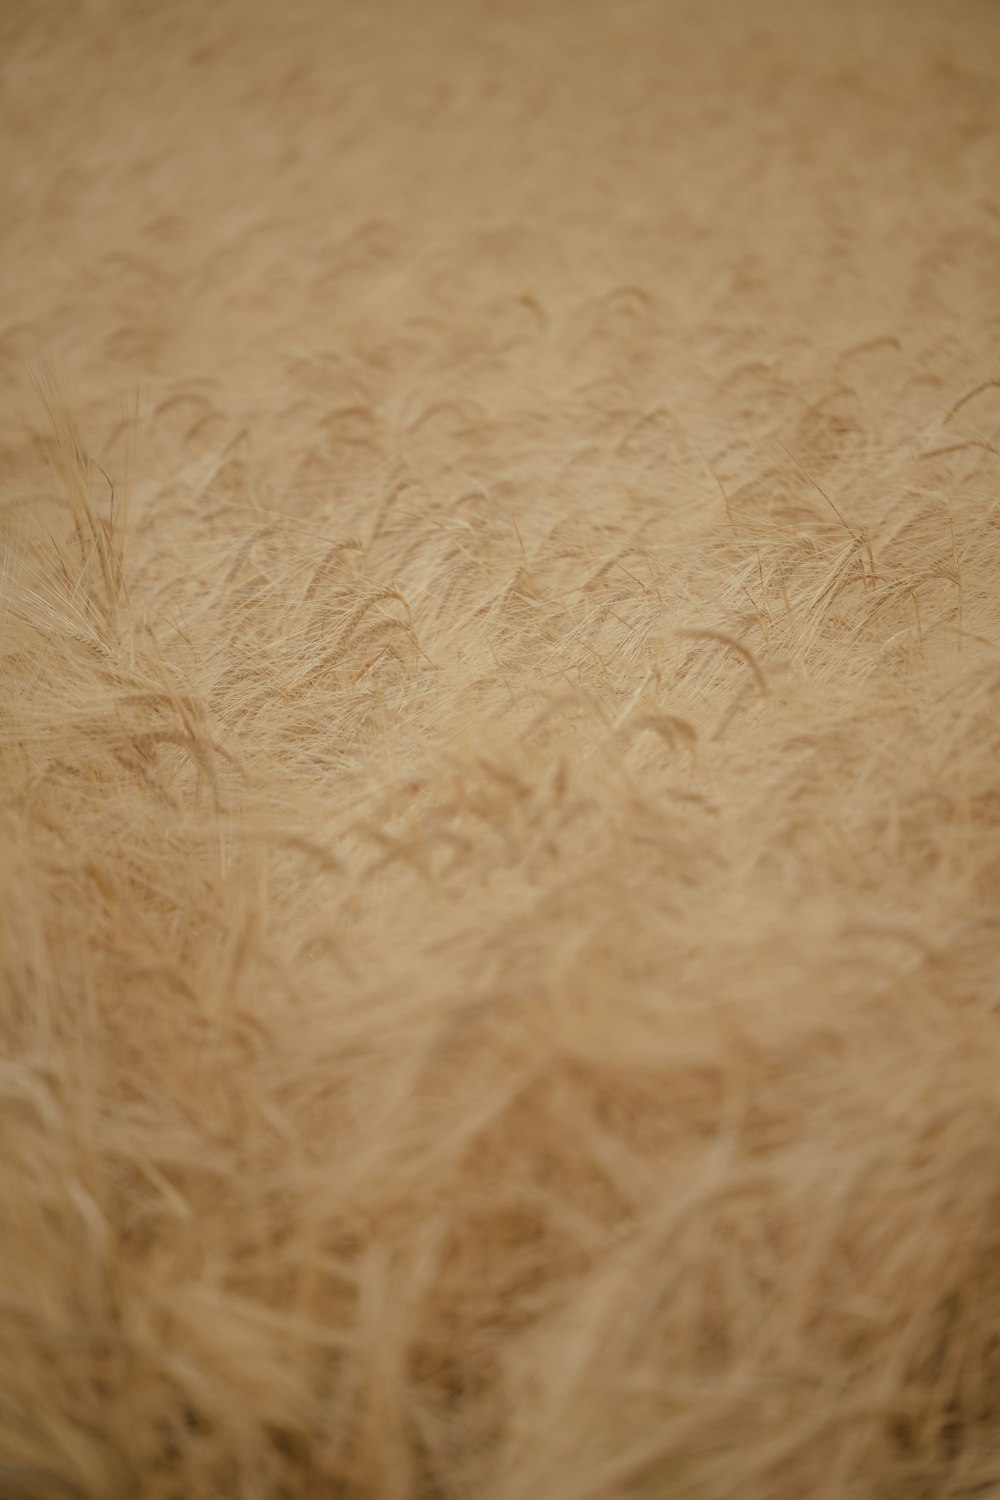 a close up of a sand dune